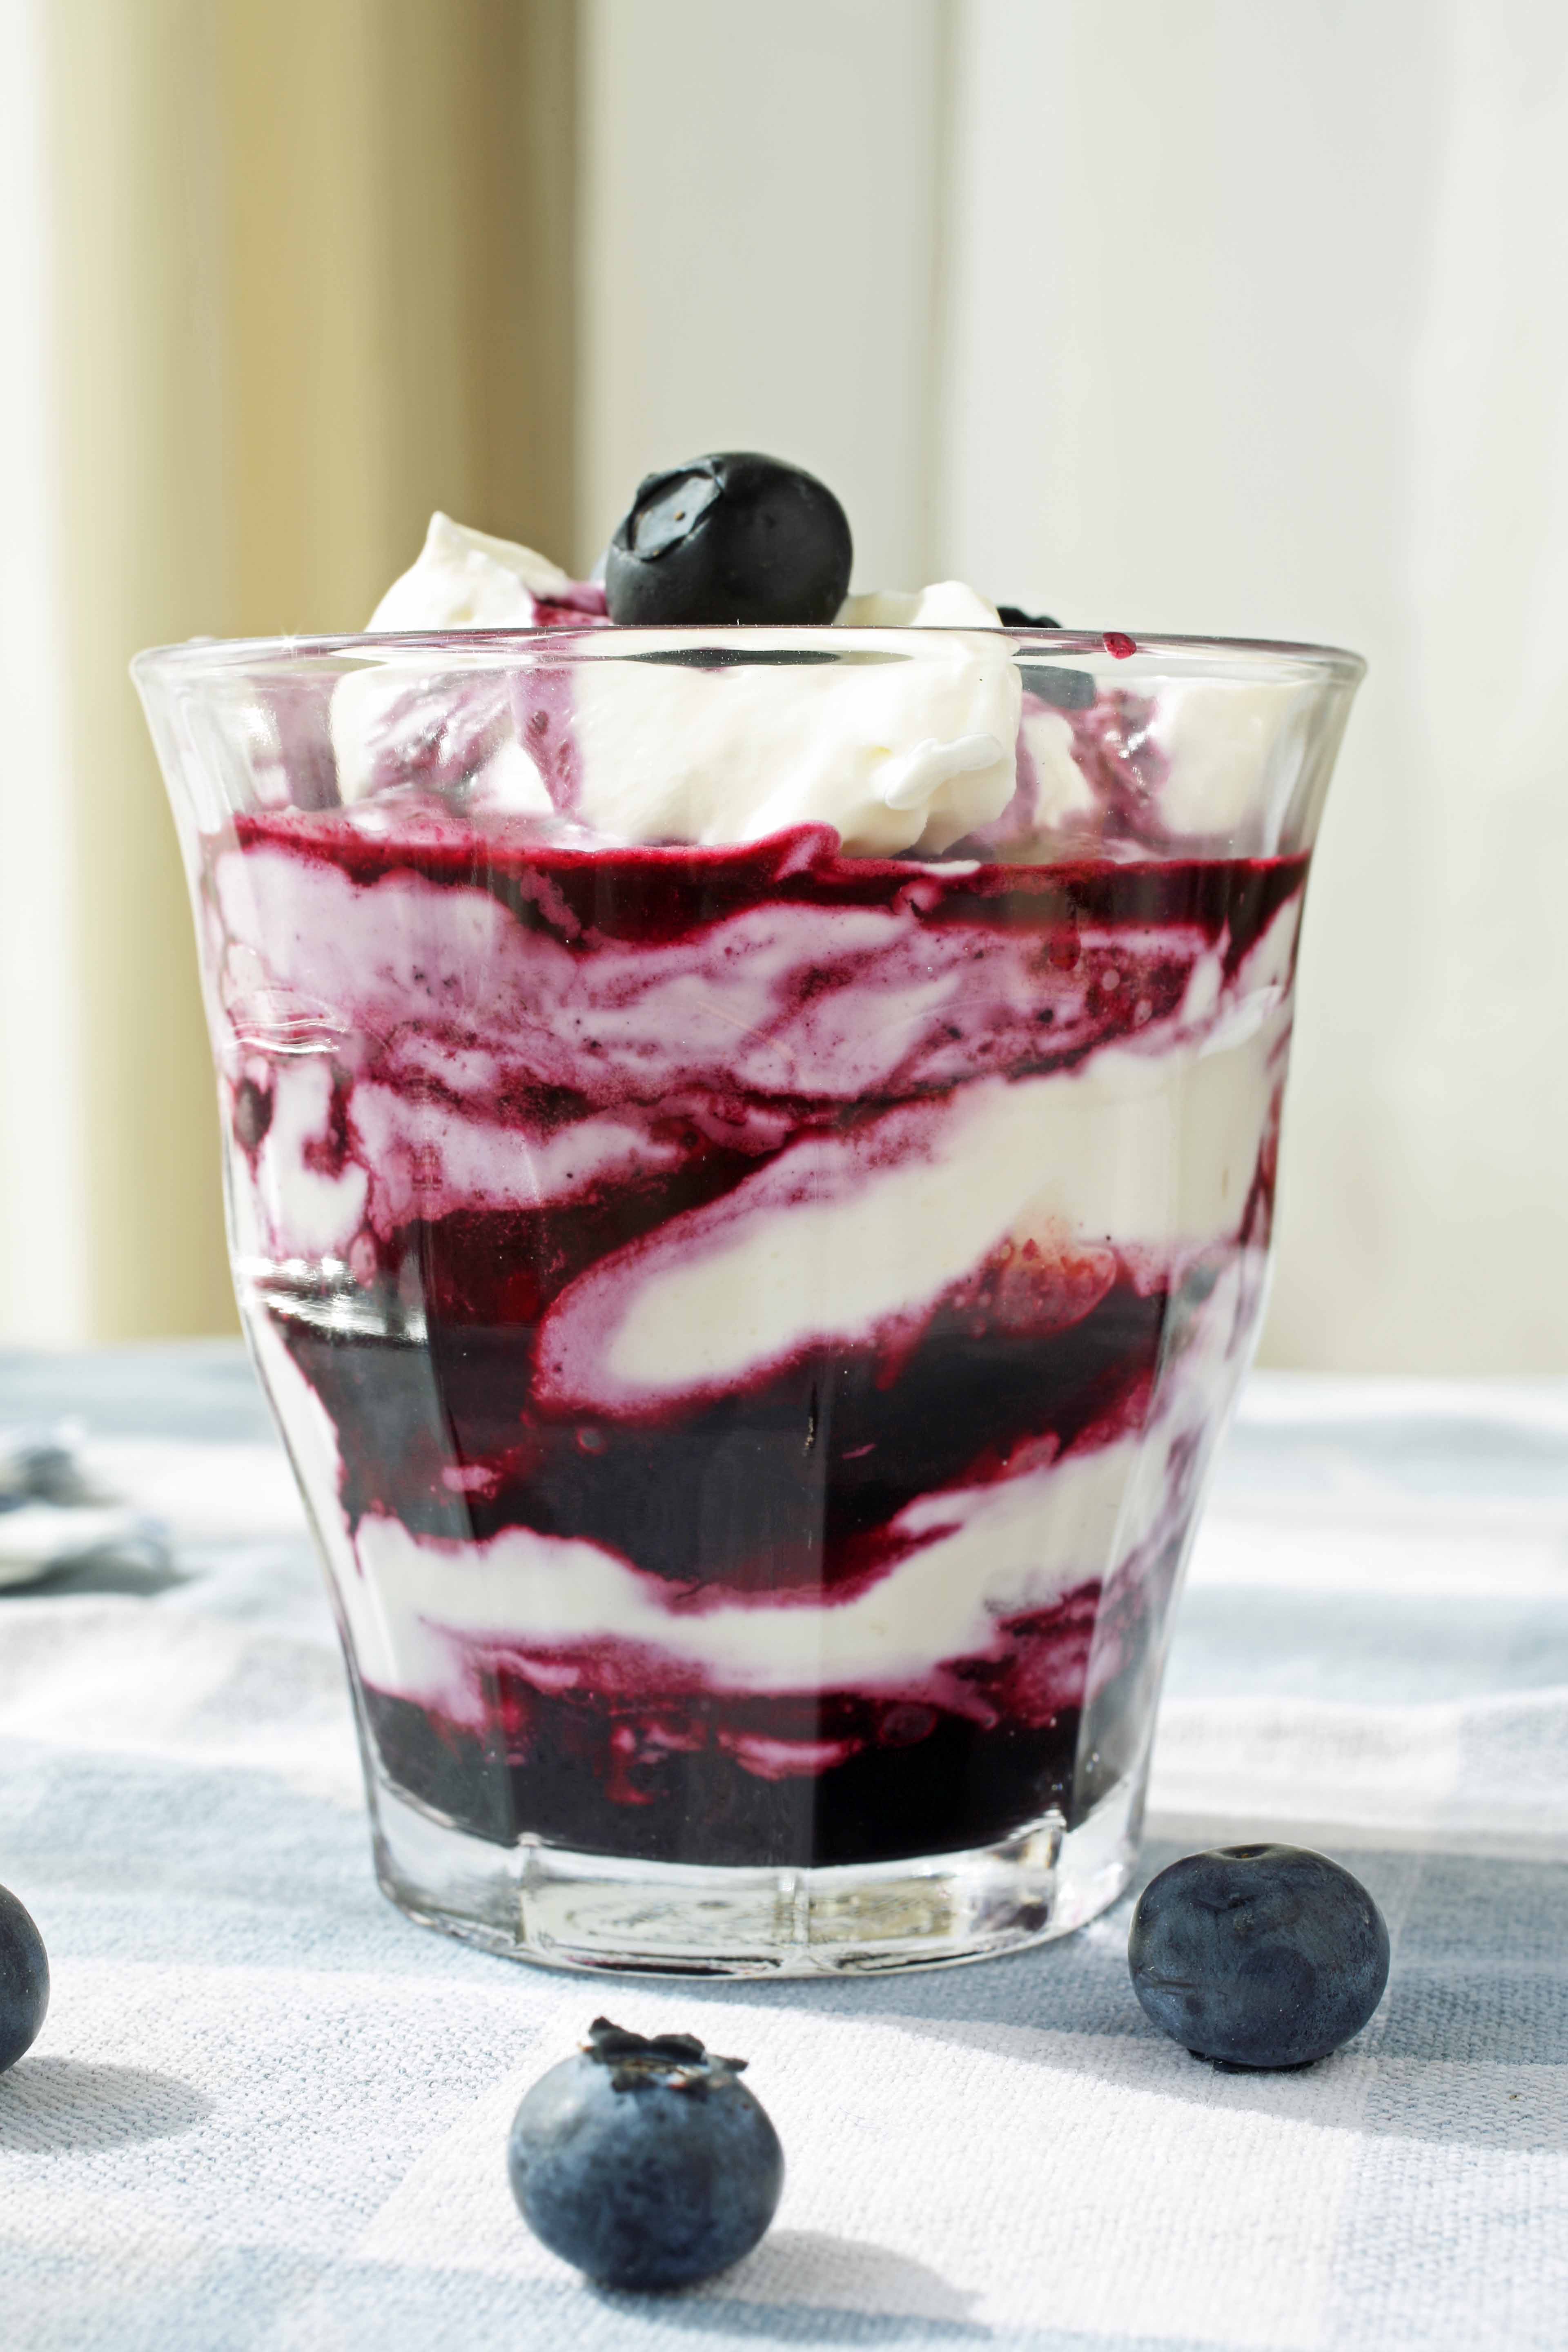 how to Make A Blueberry Fool